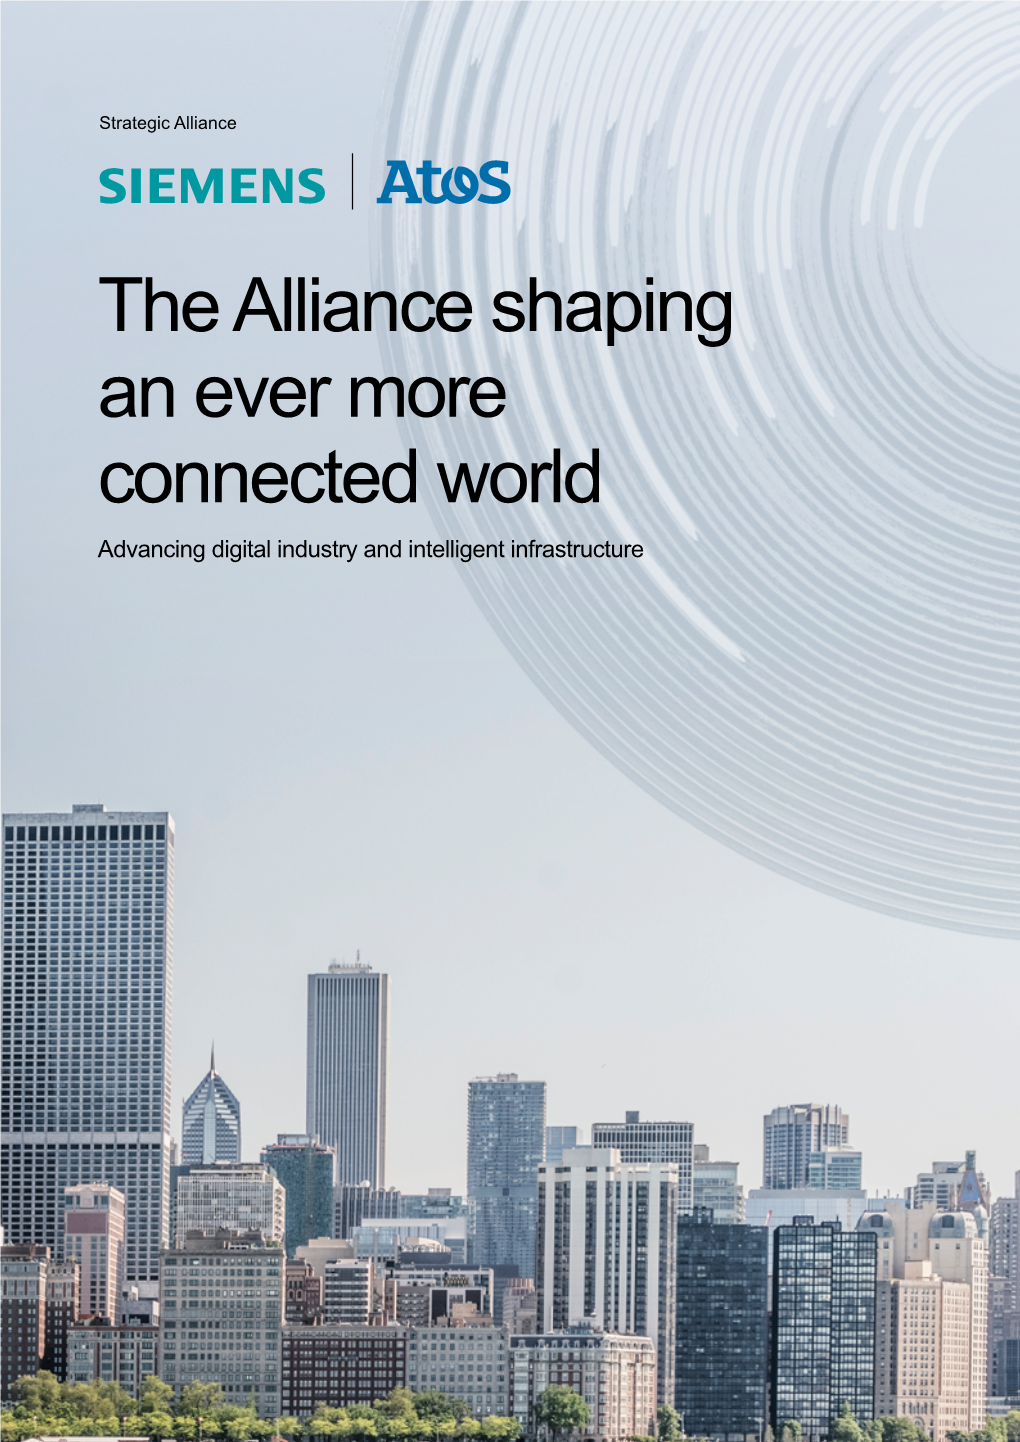 The Alliance Shaping an Ever More Connected World Advancing Digital Industry and Intelligent Infrastructure How the Alliance Is Shaping the Connected World